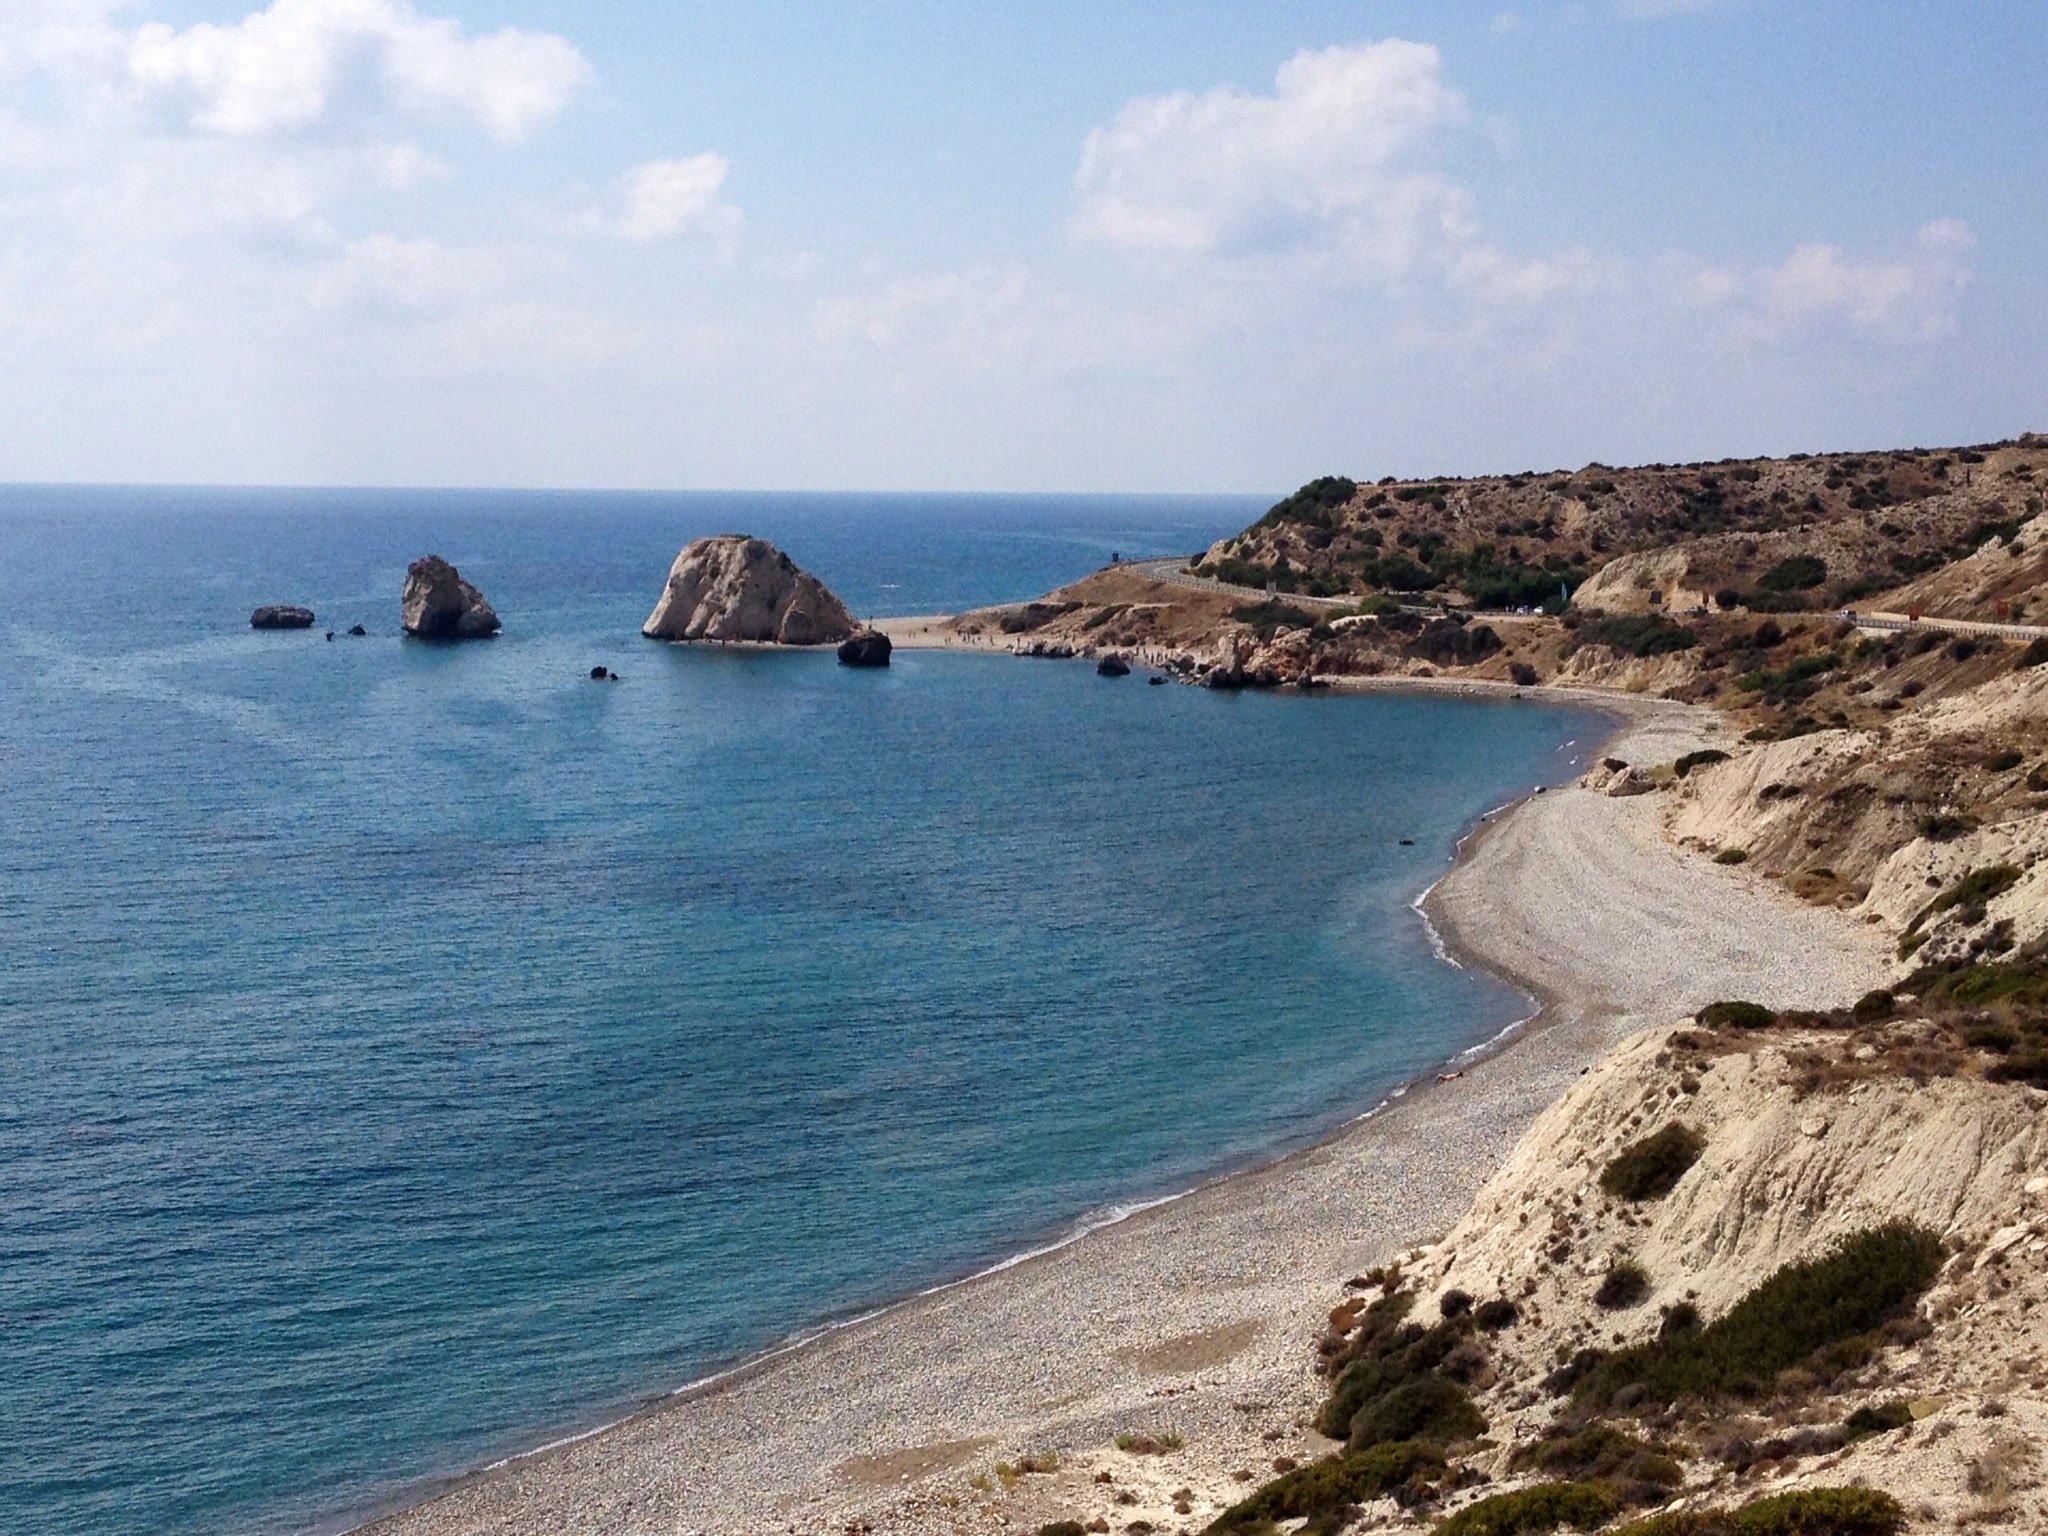 A stunning view of the sea and the rocky coast of Petra tou Romiou, Cyprus.